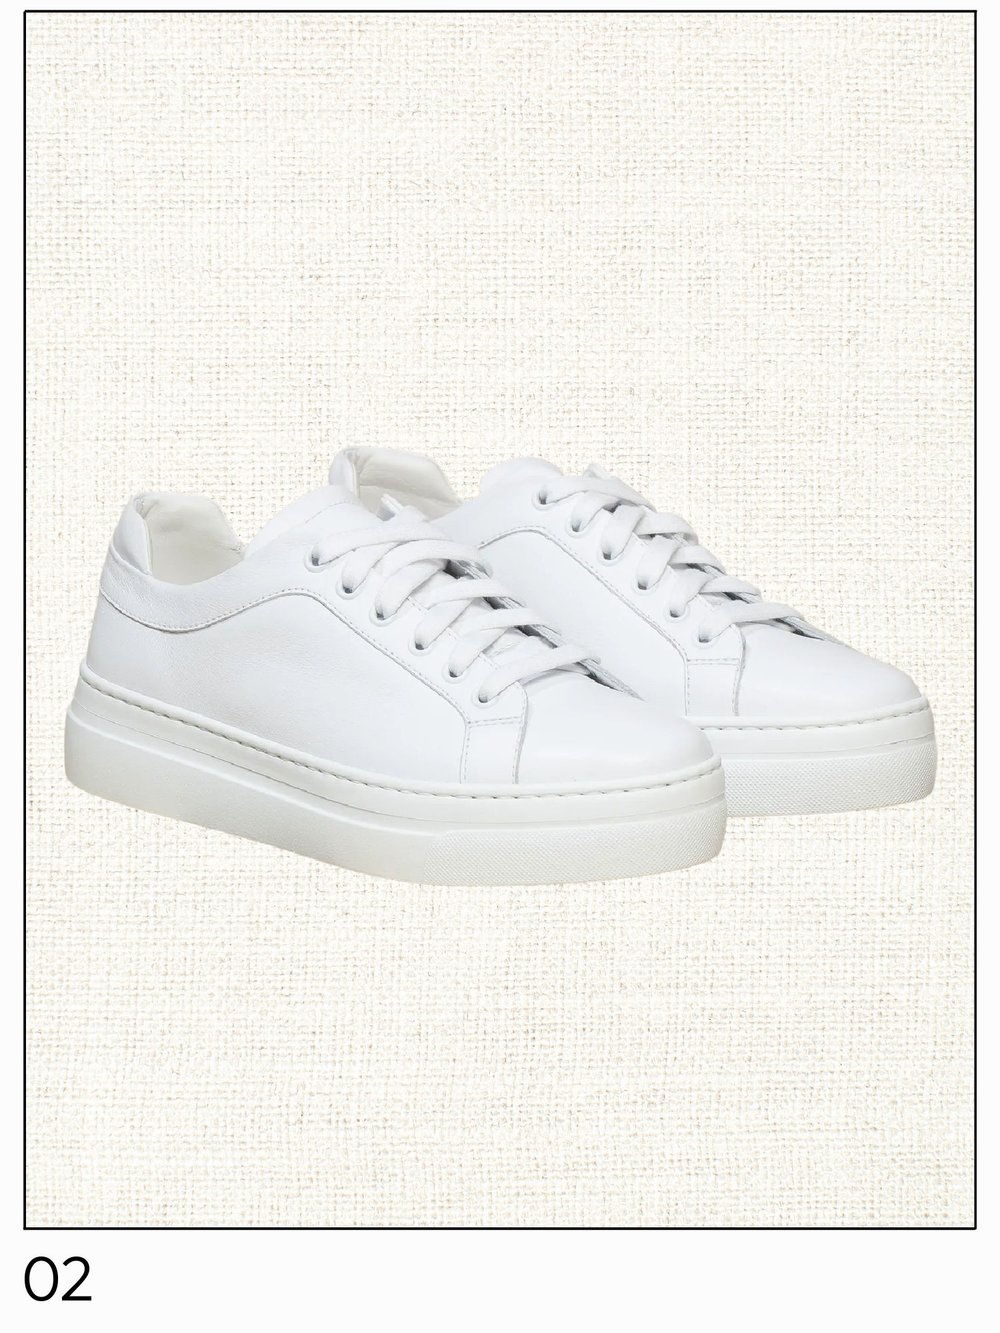 Handmade White Leather Sneakers